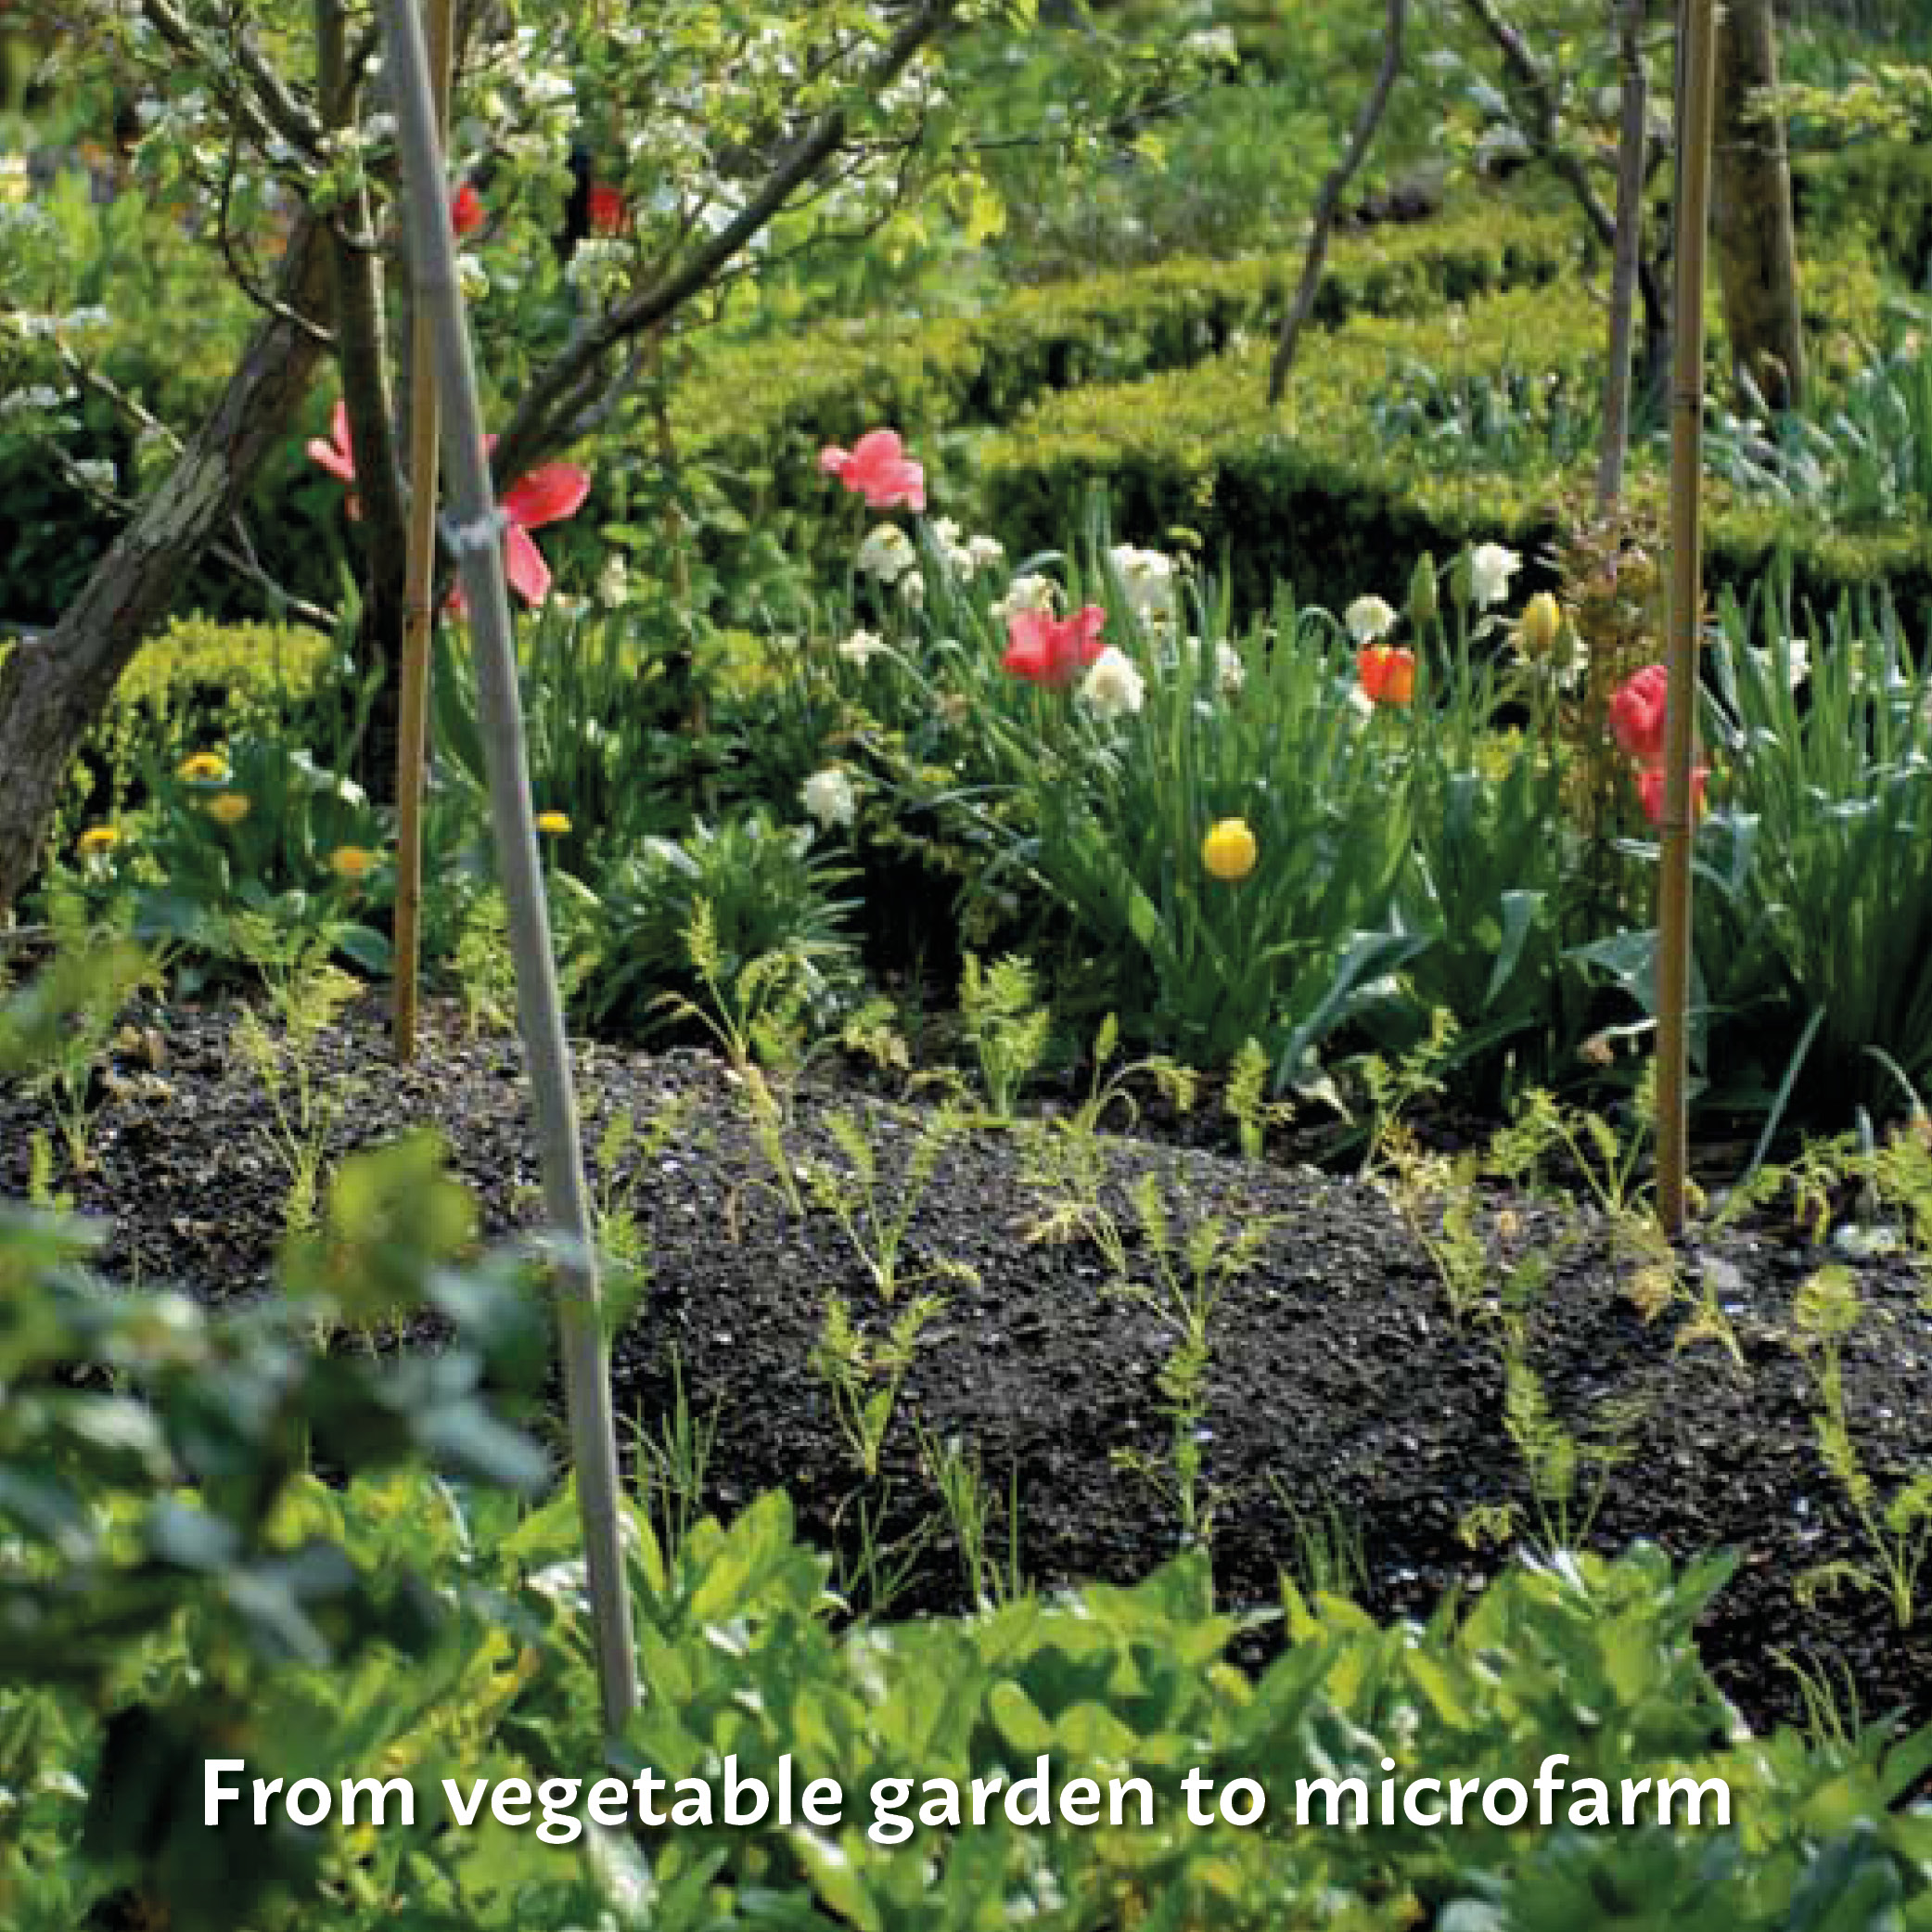 Top Story: From Vegetable Garden to Microfarm